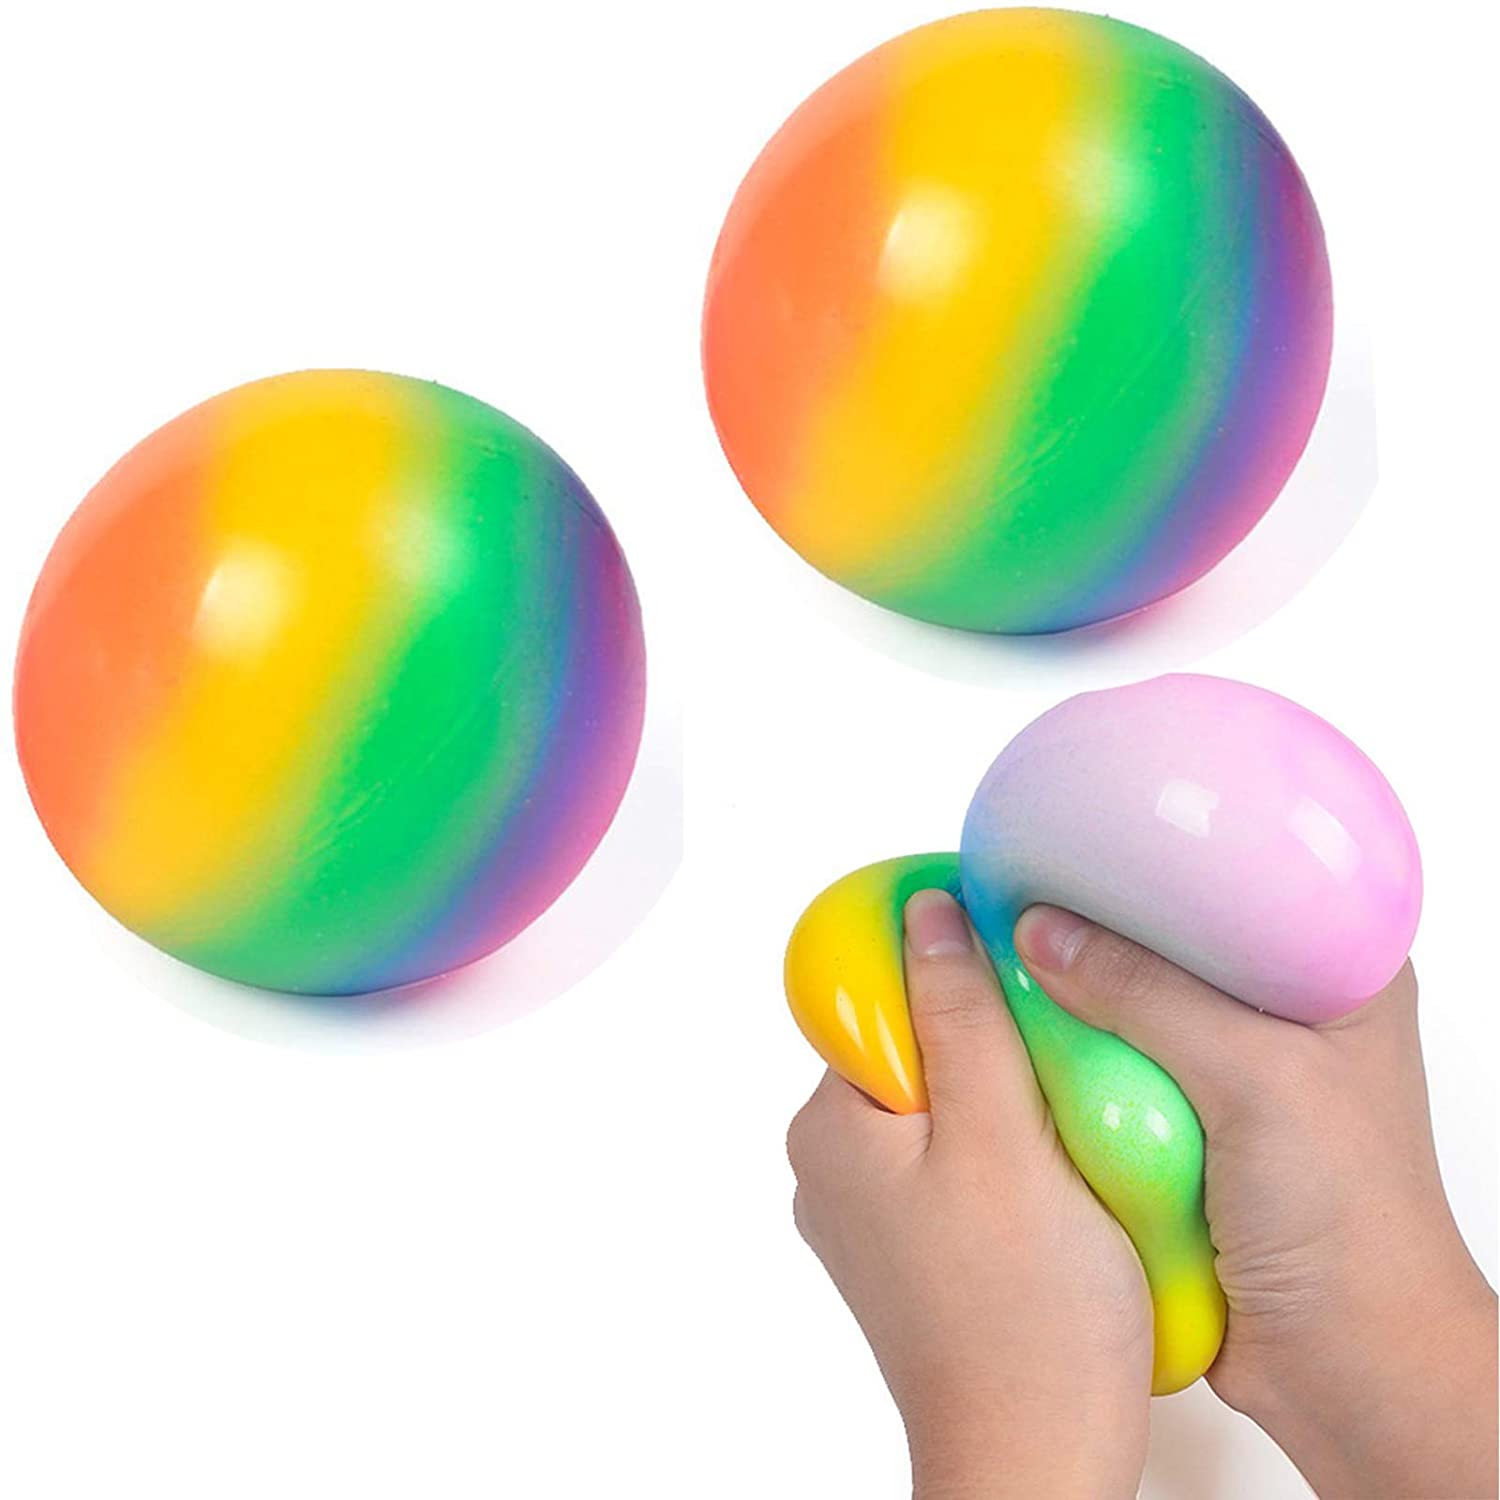 Flashing Stretchy Arm Bouncy Ball Face Flexible Arms Toy Gift Novelty Childs 